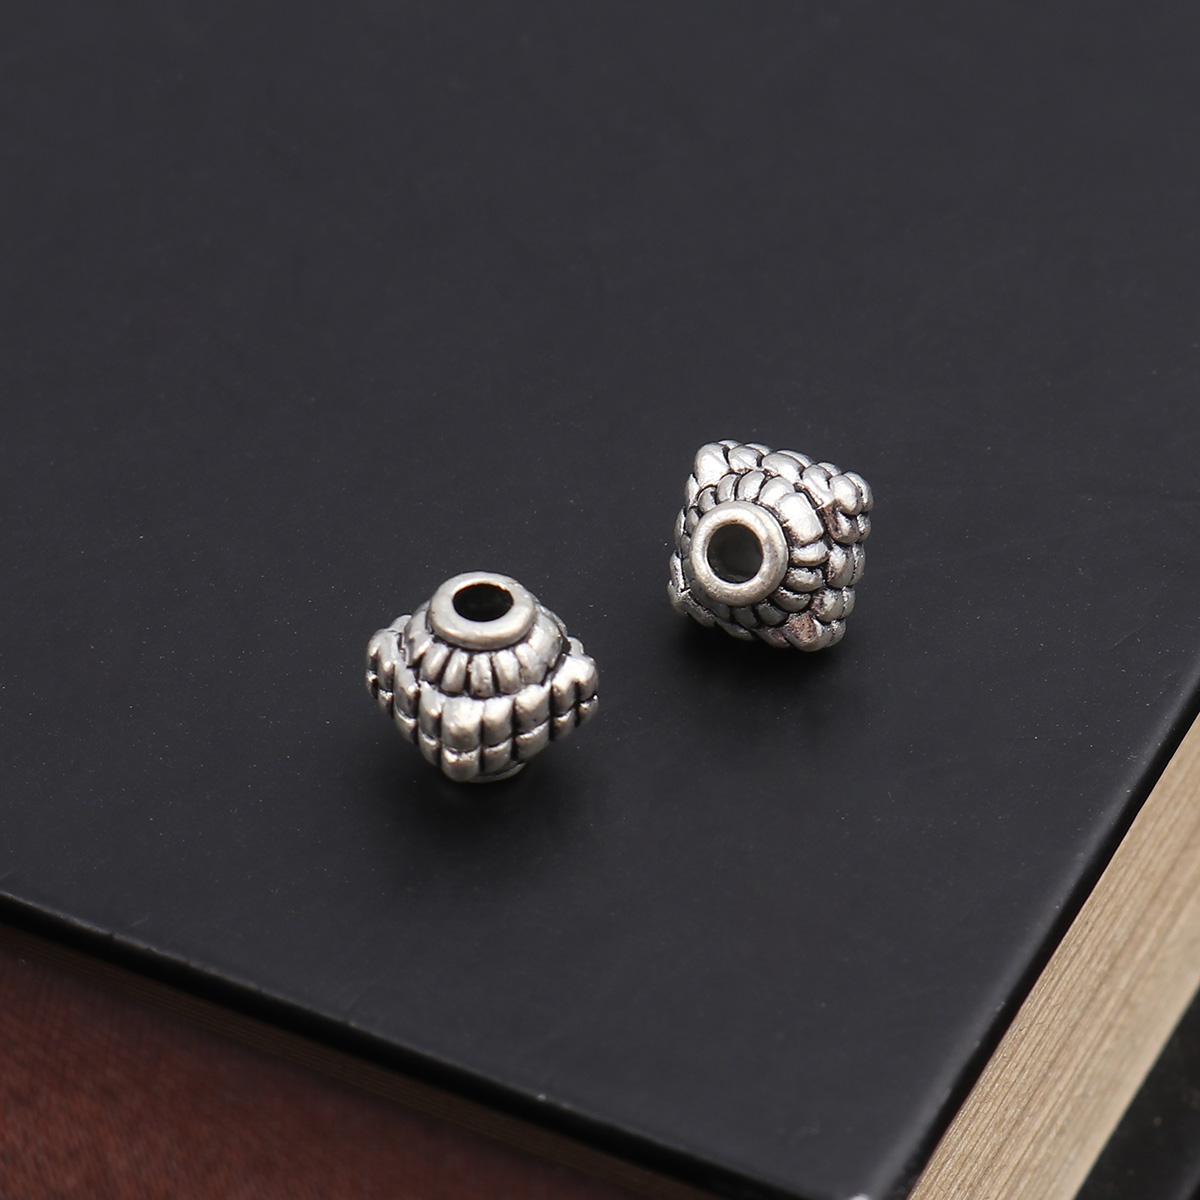 Picture of Zinc Based Alloy Spacer Beads Barrel Antique Silver 8mm x 8mm, Hole: Approx 2.2mm, 50 PCs